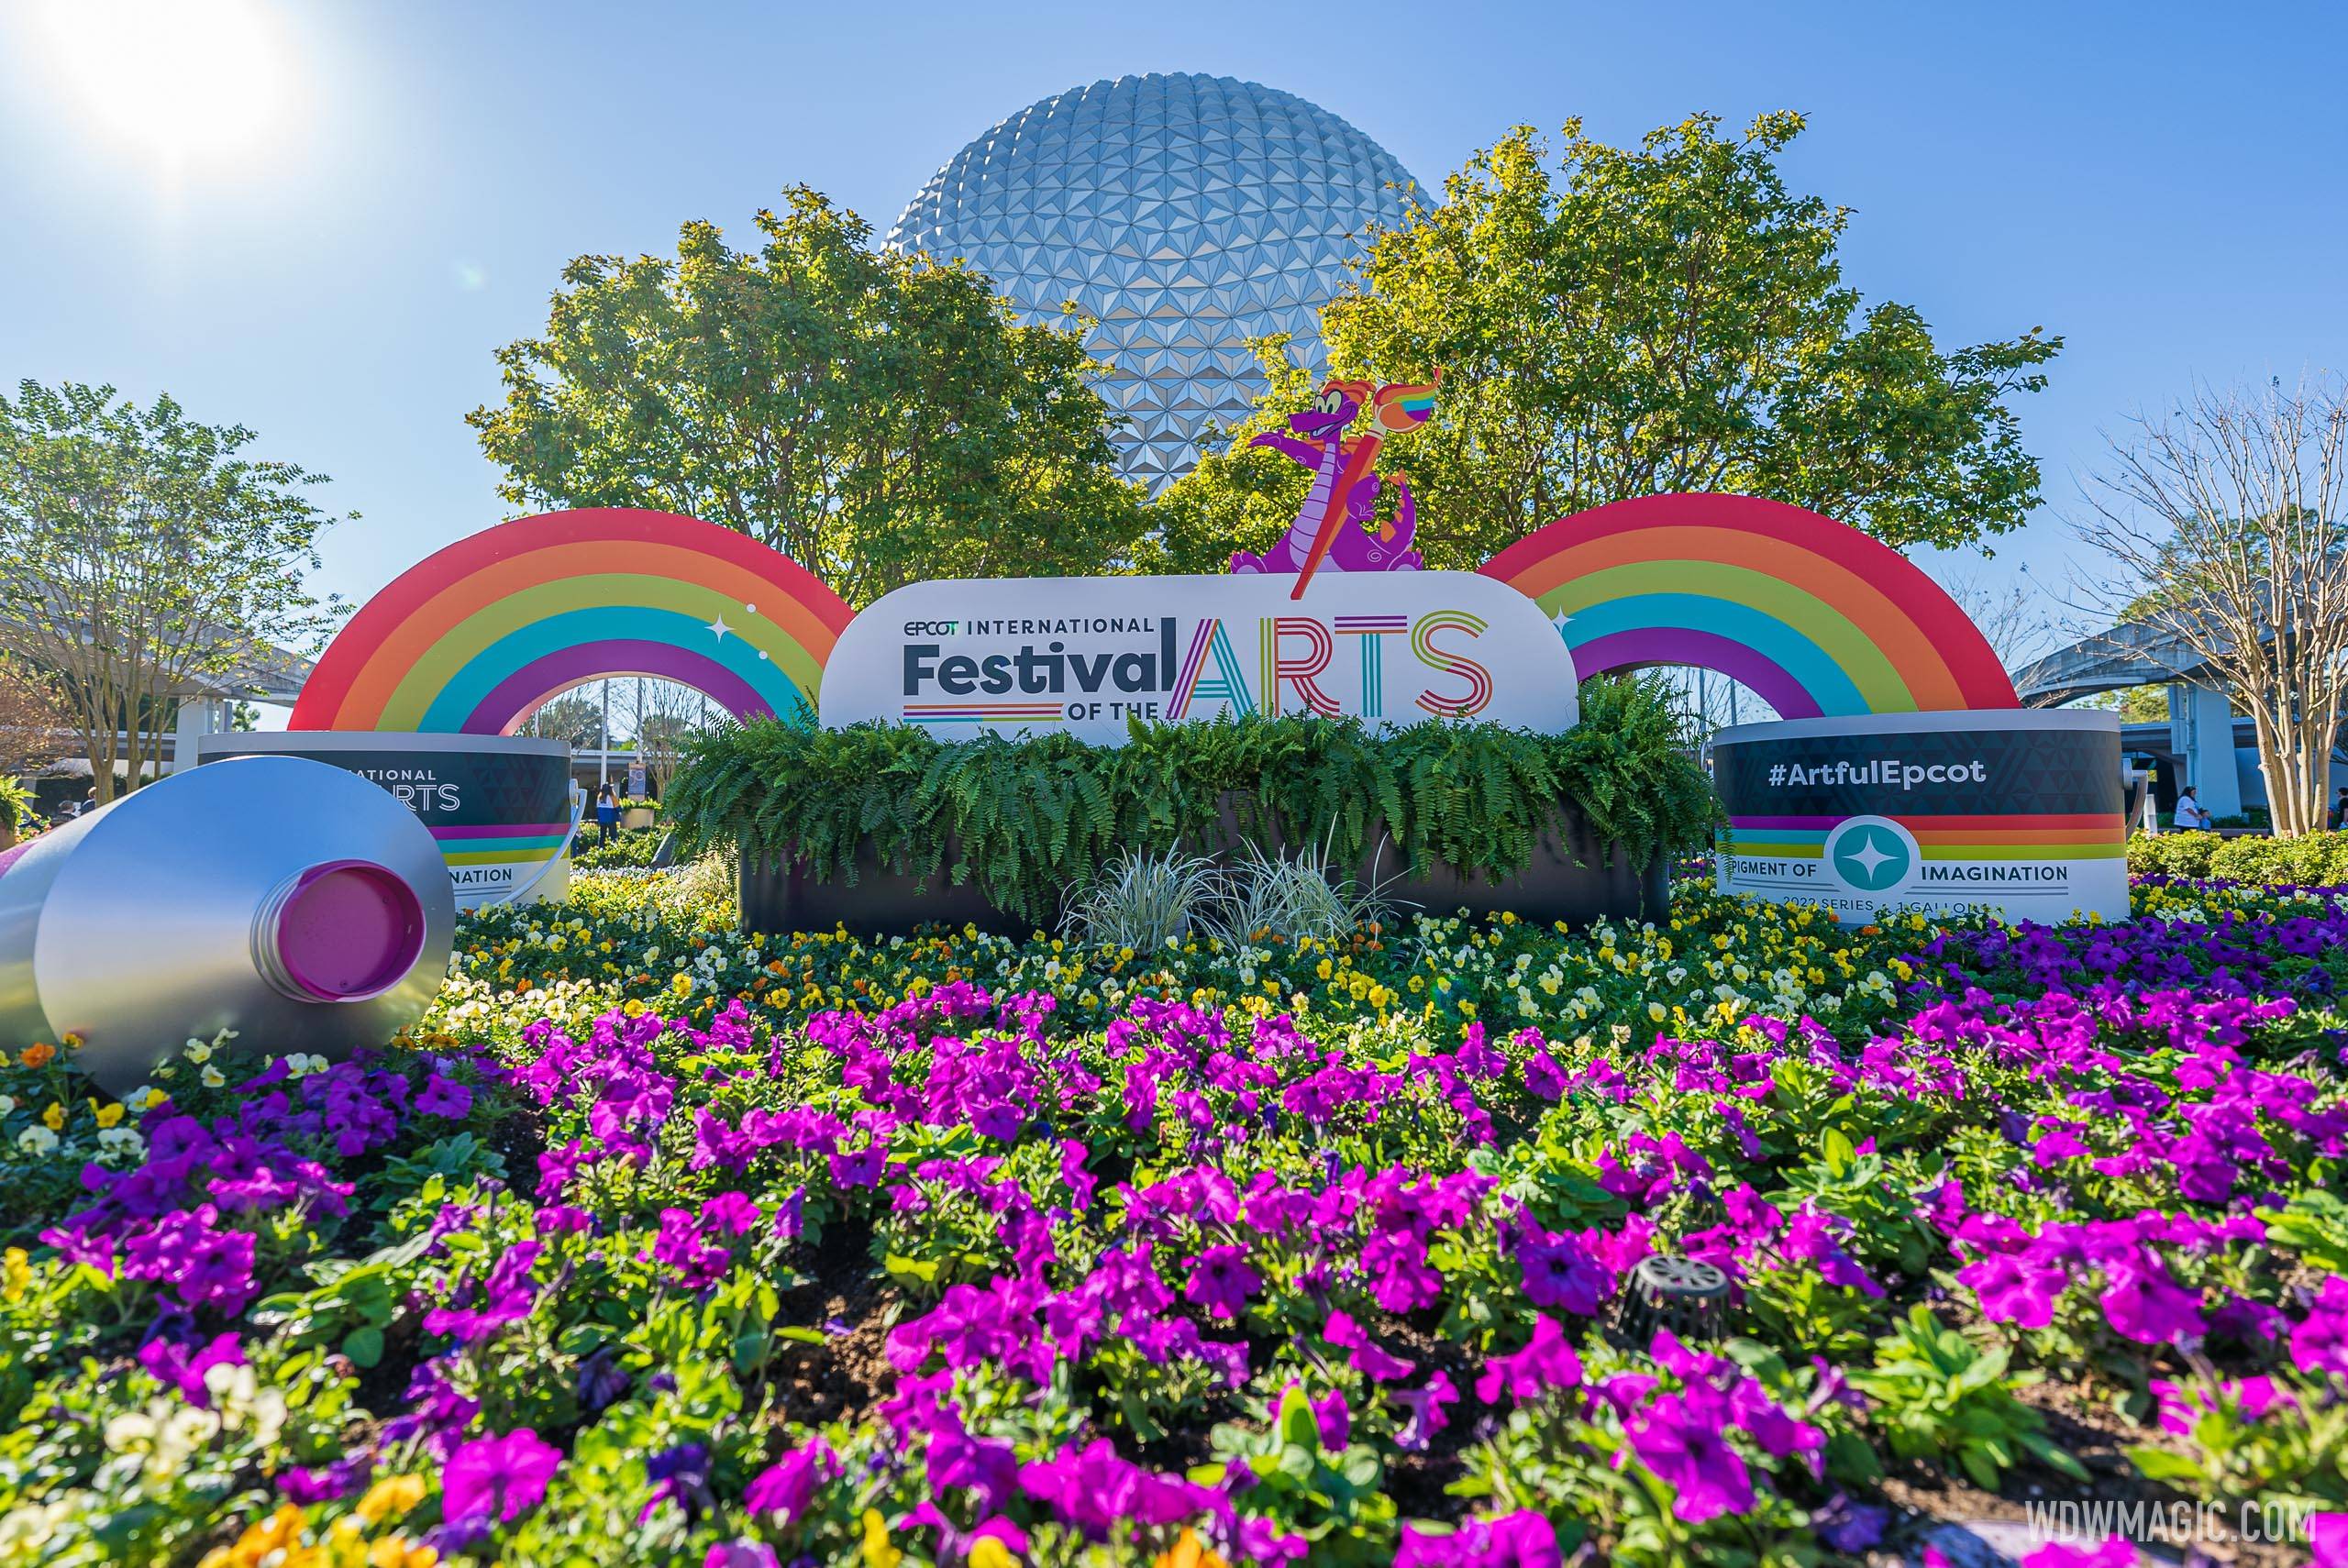 The EPCOT International Festival of the Arts will feature 15 food studio kiosks